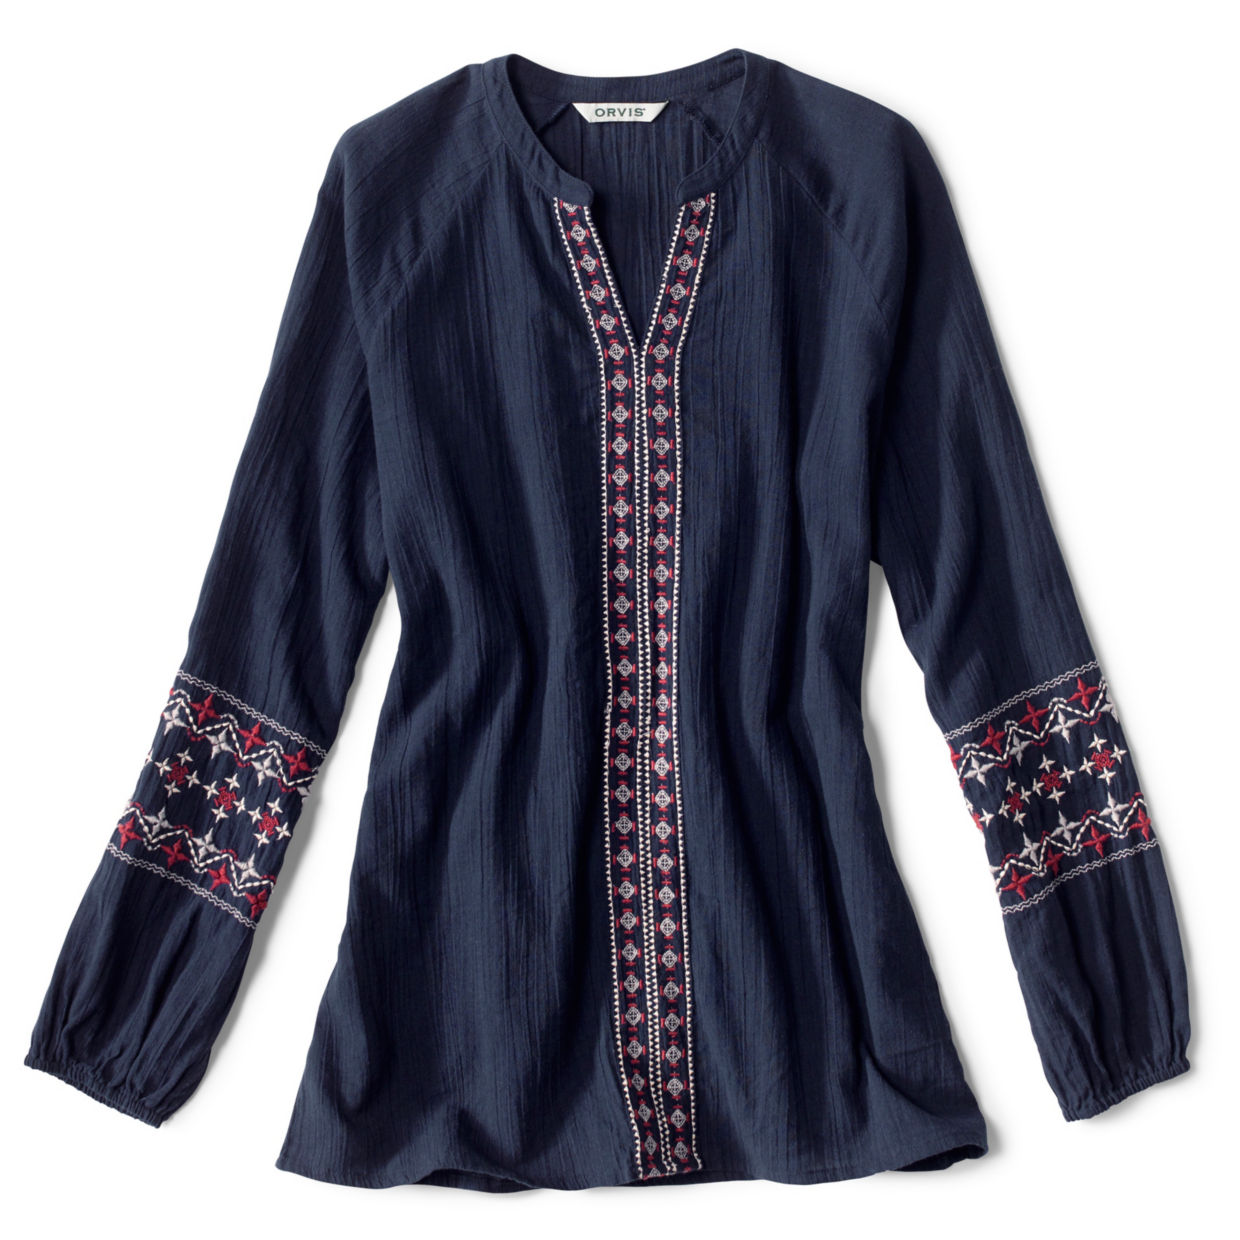 Long-Sleeved Embroidered Popover Shirt